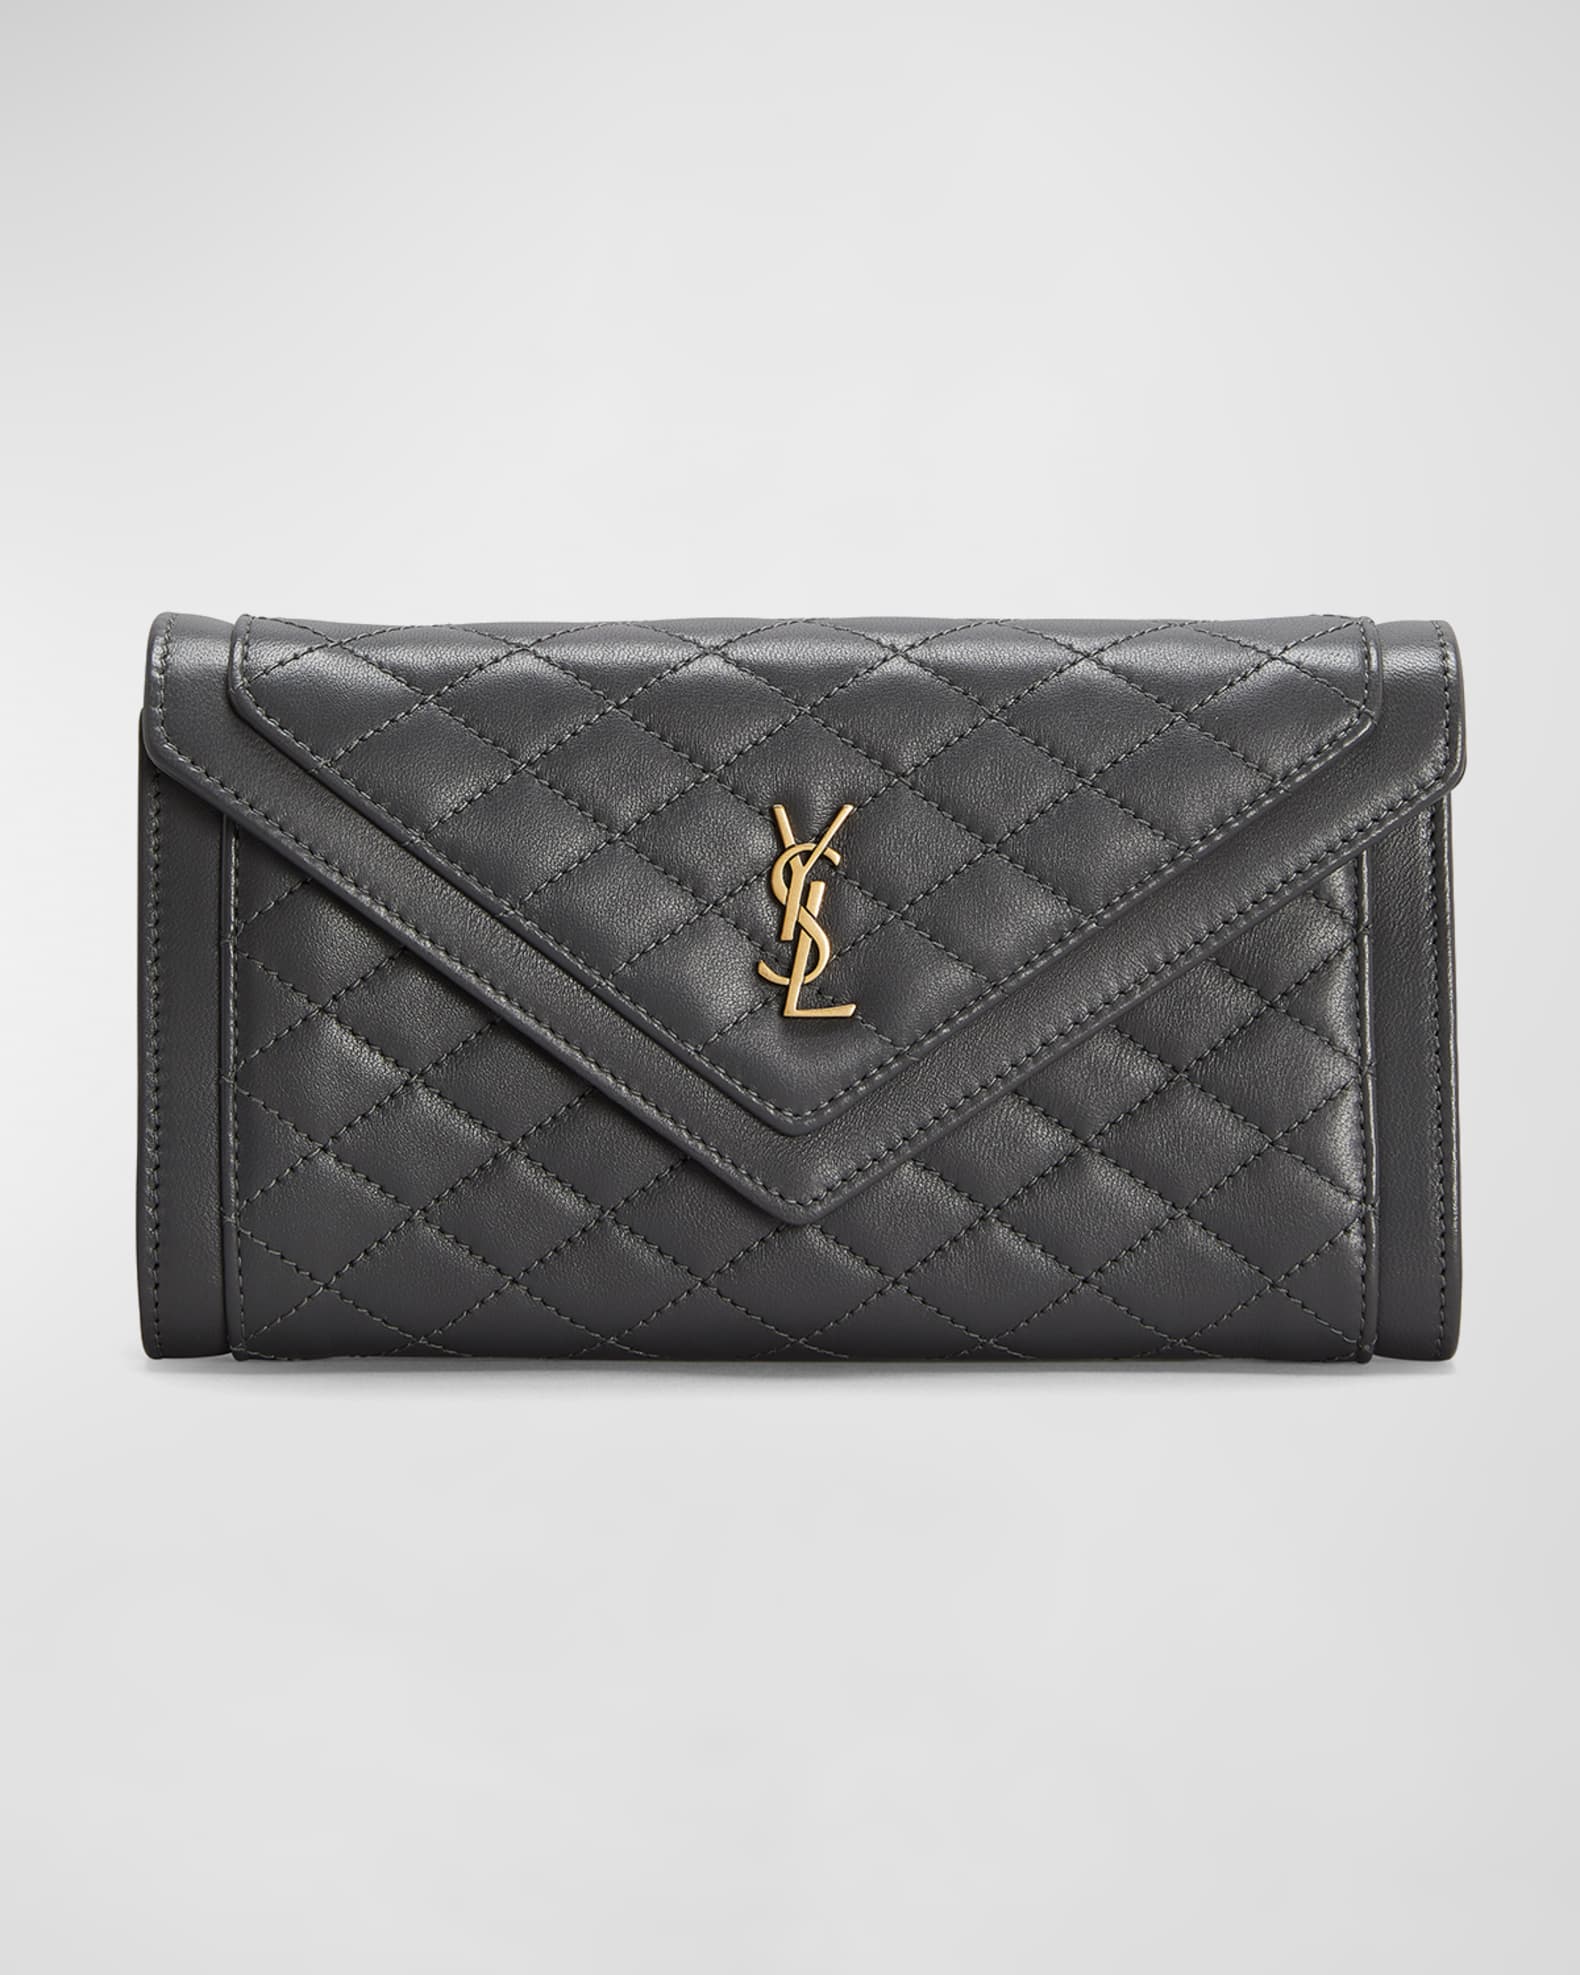 Saint Laurent Large Gaby Quilted Leather Envelope Wallet in 1112 Storm